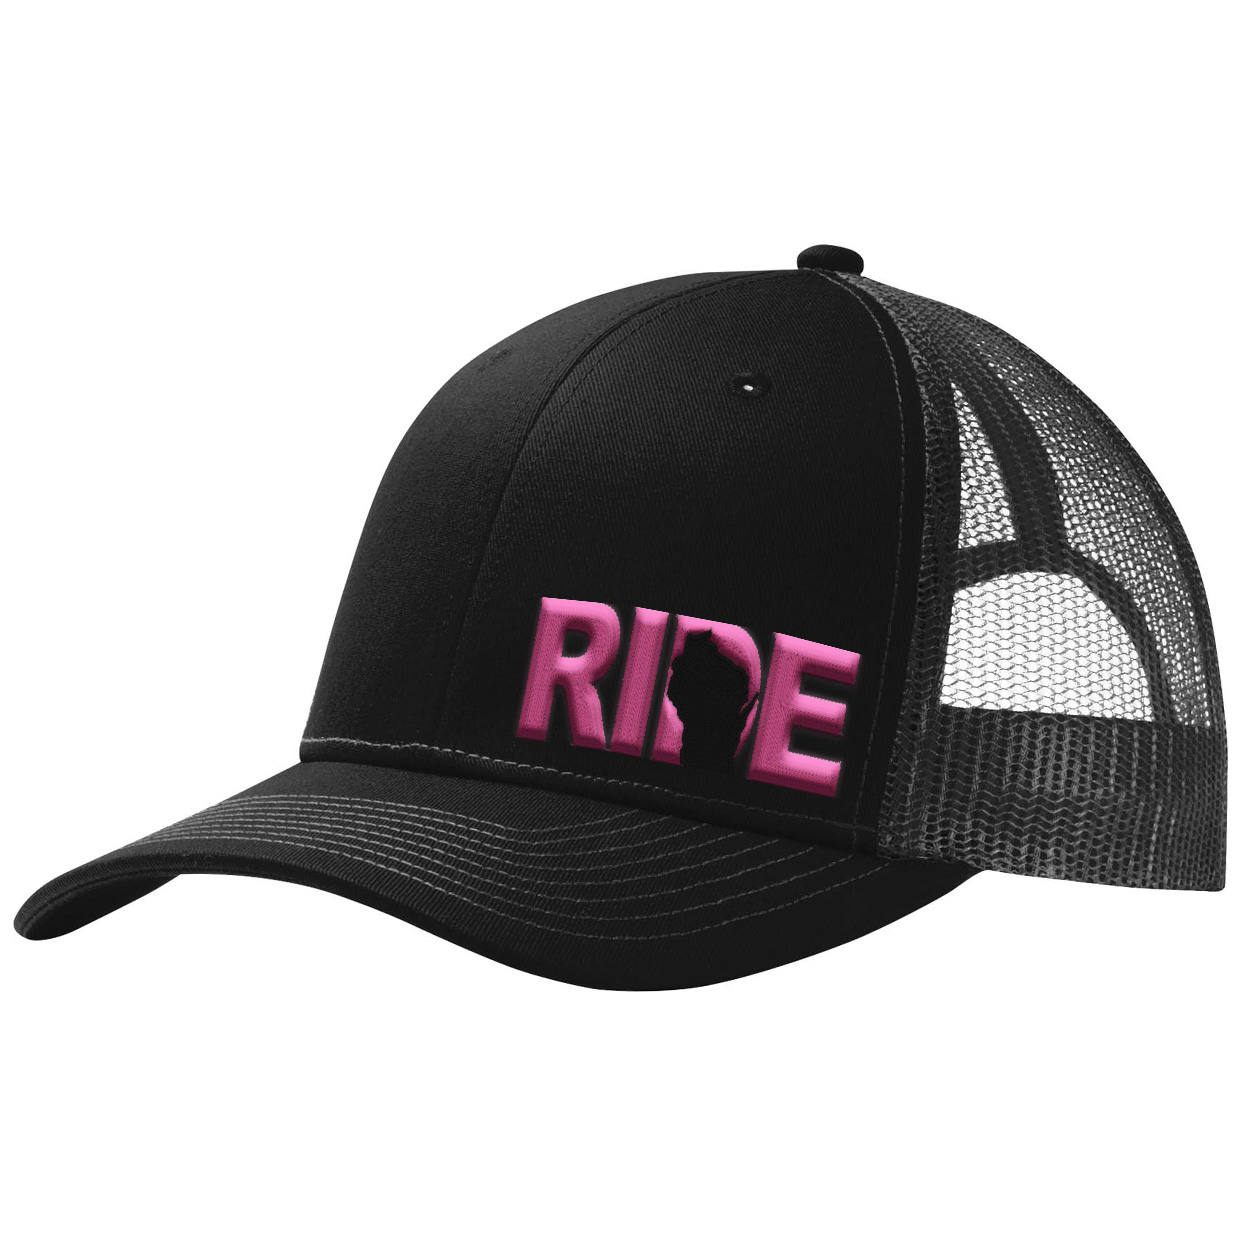 Ride Wisconsin Night Out Pro Embroidered Snapback Trucker Hat Black/Pink